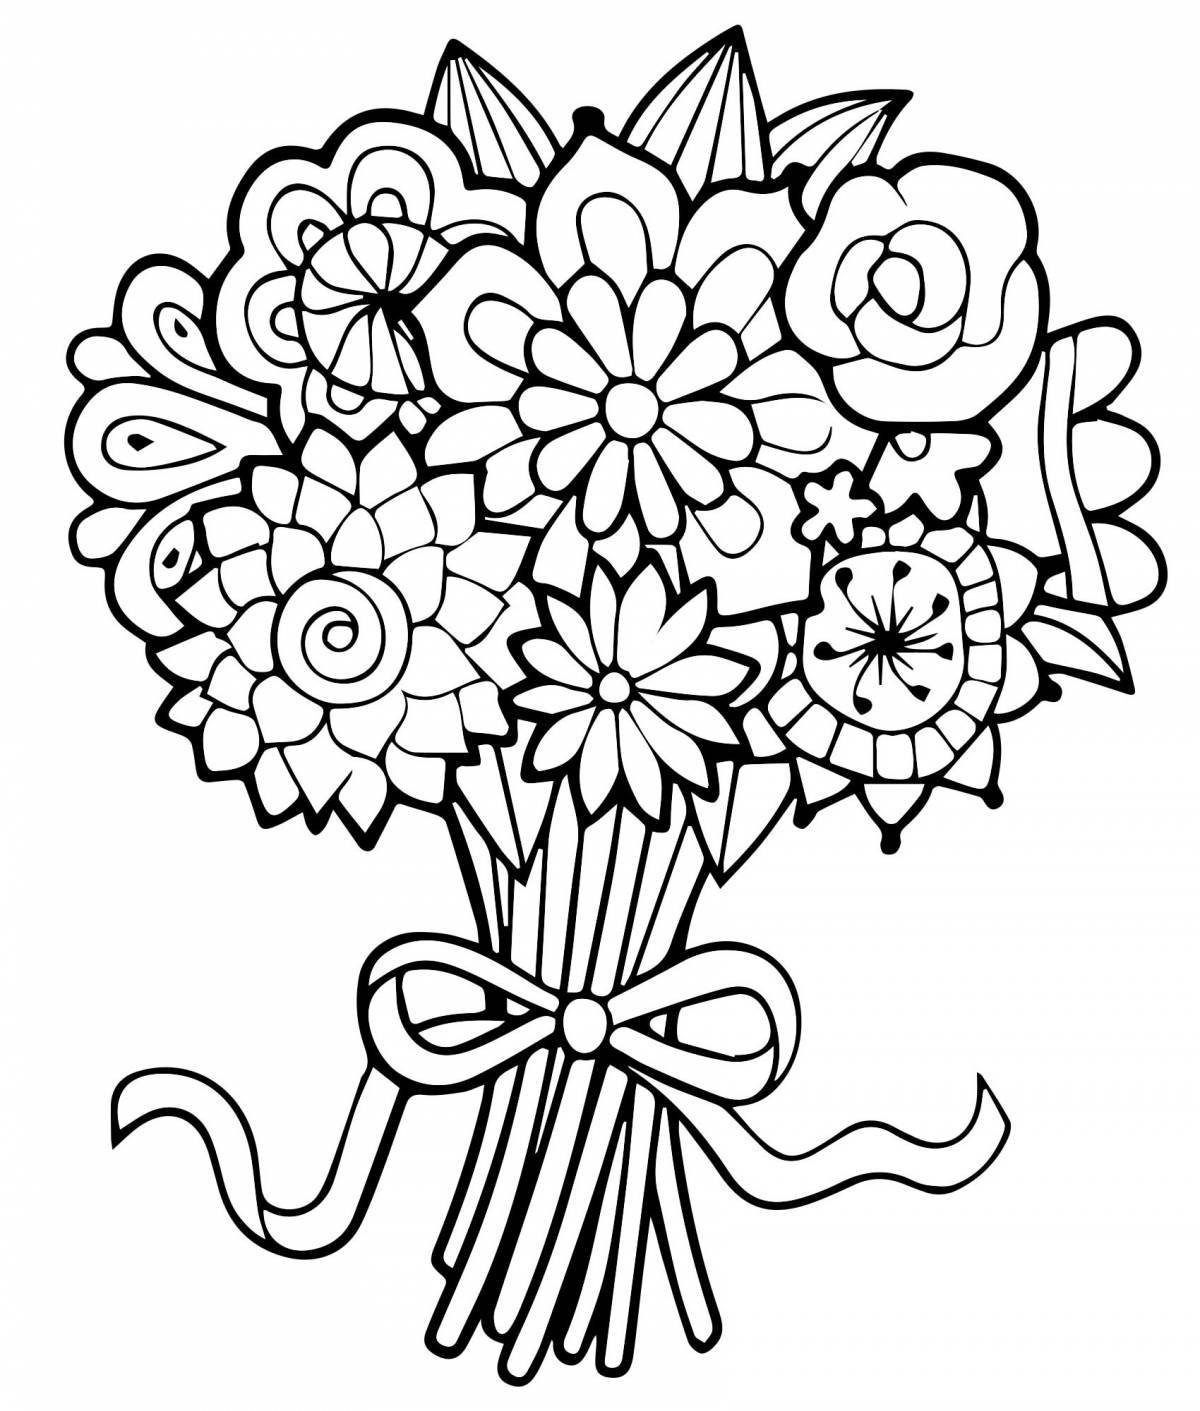 Colorful shiny bouquet coloring book